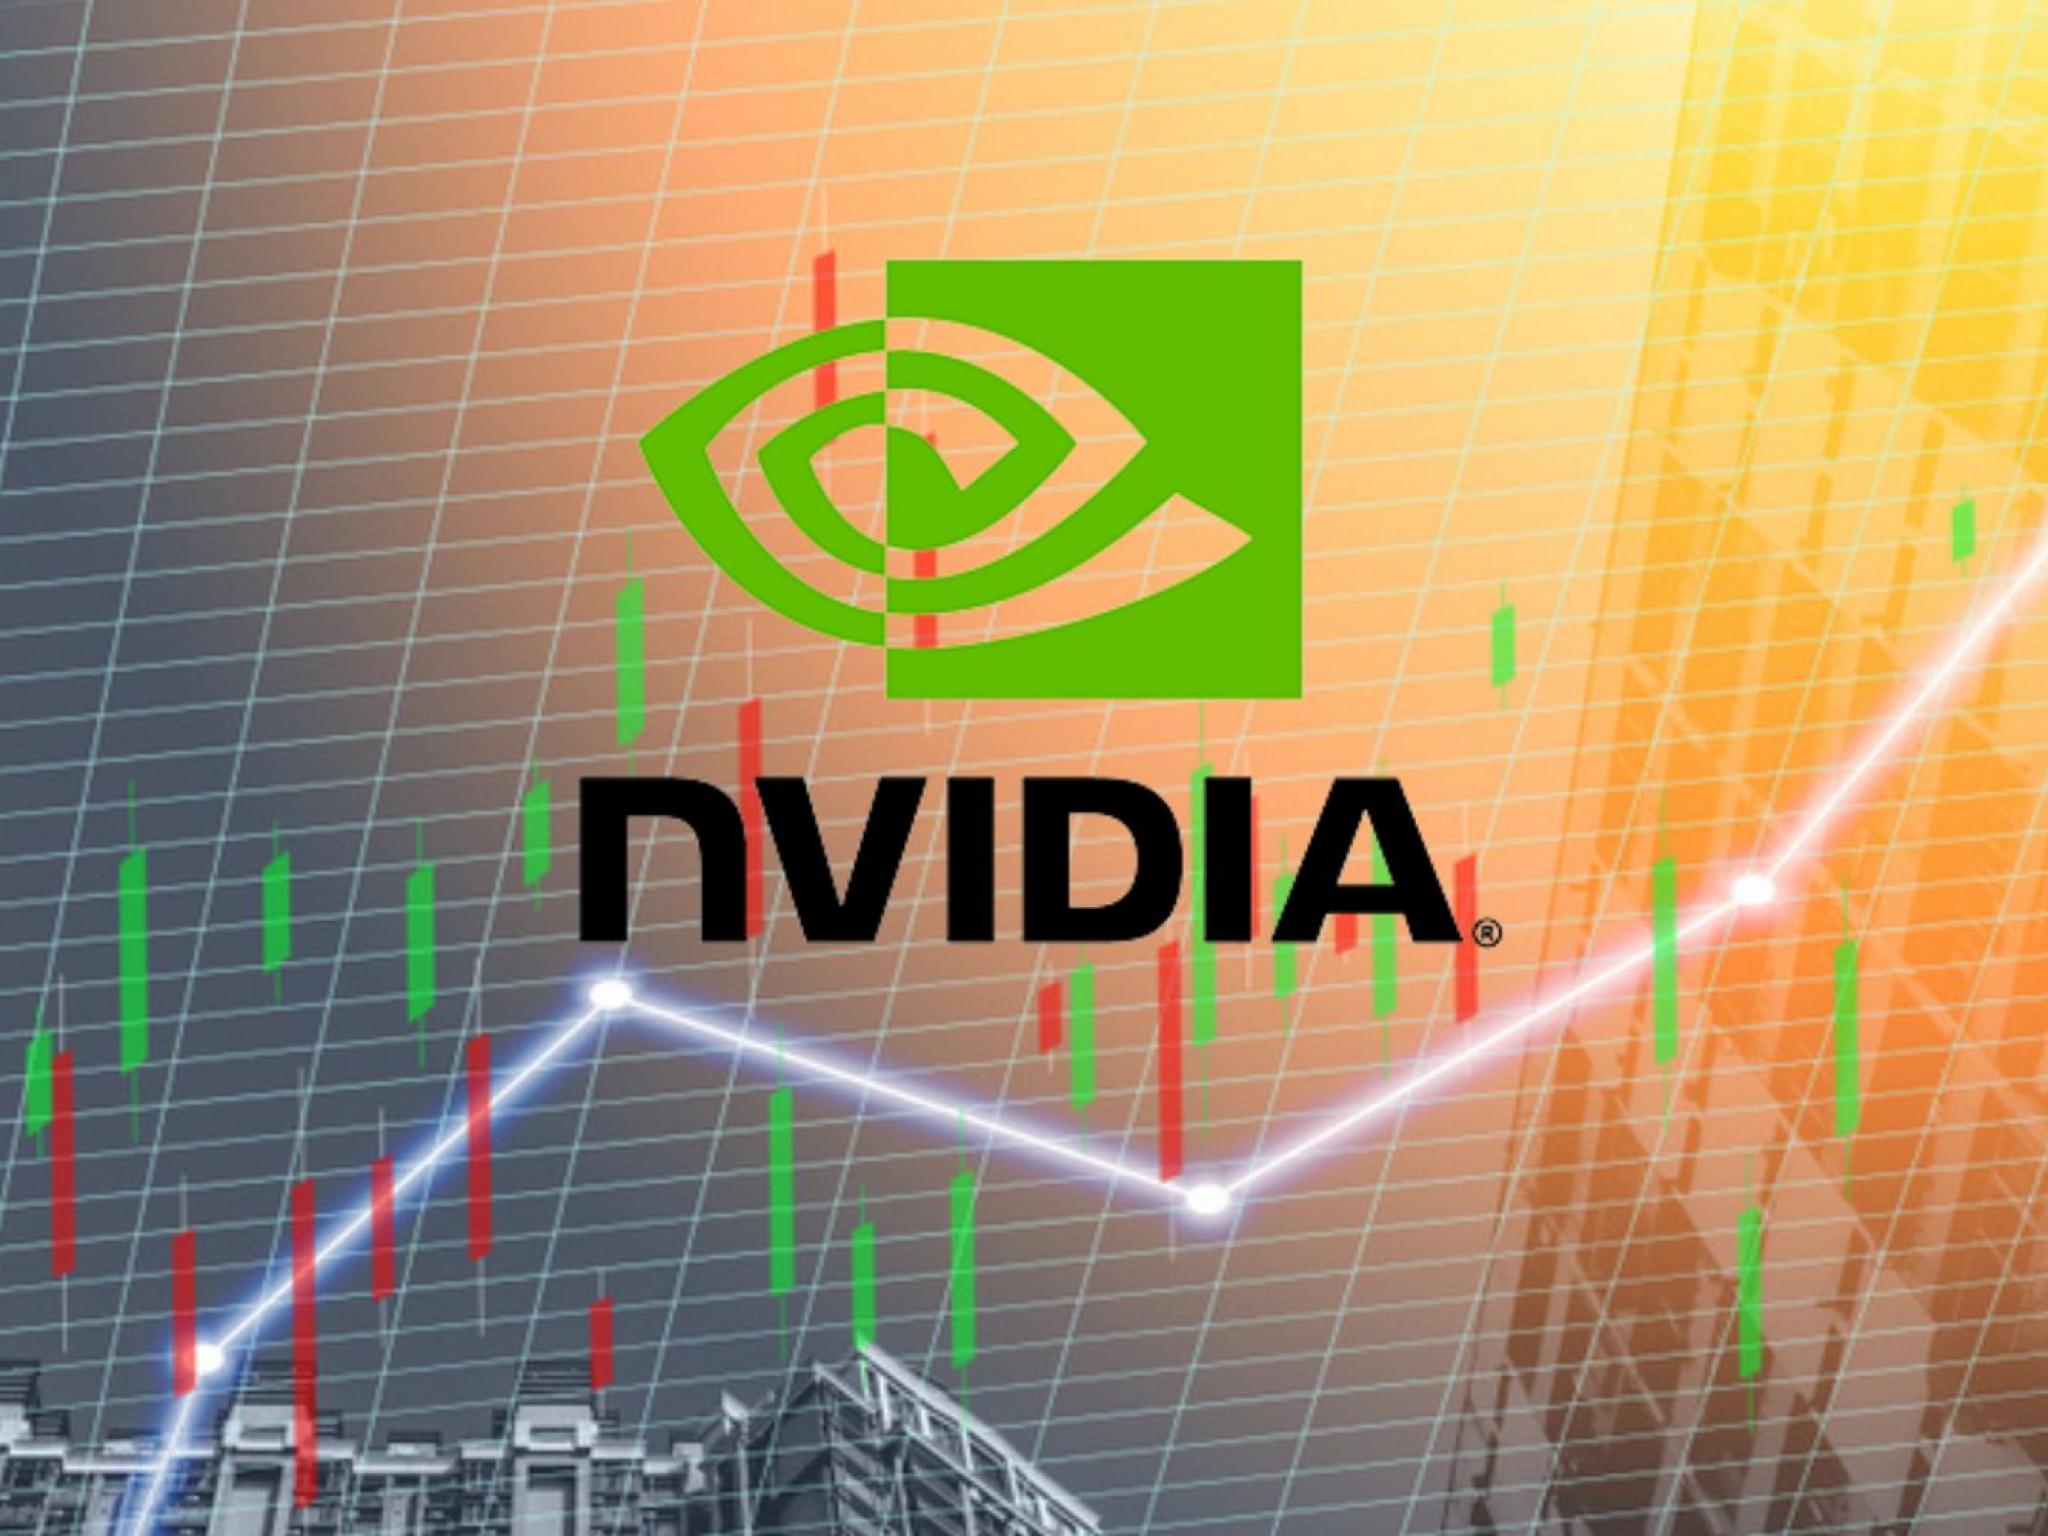  nvidia-becomes-ninth-company-to-hit-1-trillion-market-cap--which-stock-could-be-next-to-join-elusive-club 